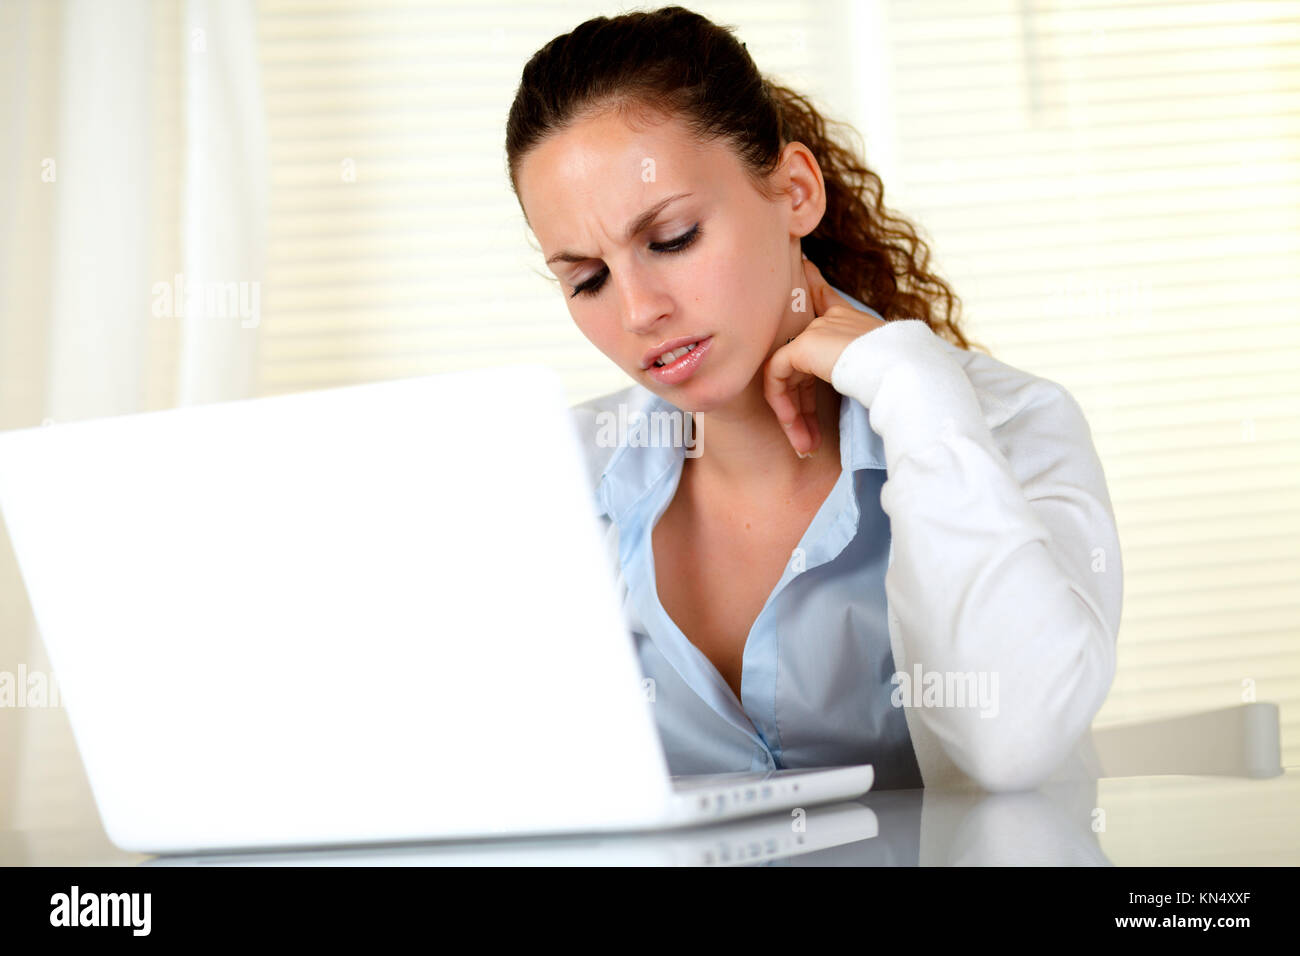 Young woman interested reading the laptop screen at office. Stock Photo